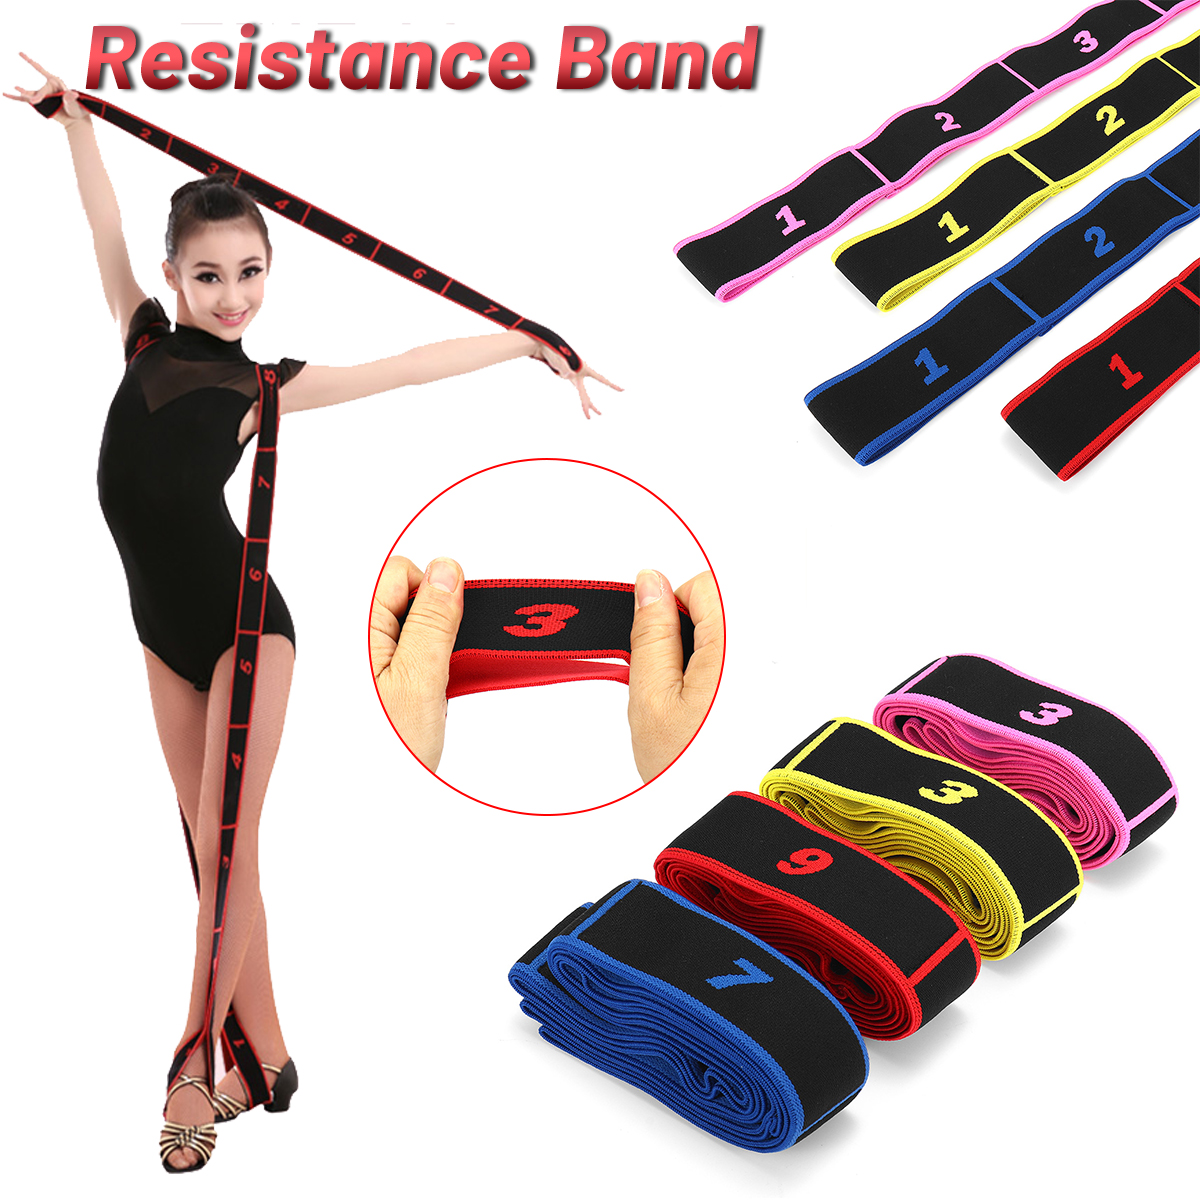 904-CM-Resistance-Bands-Strength-Training-Harness-Exercise-Sport-Fitness-For-Adults-Children-1708045-1